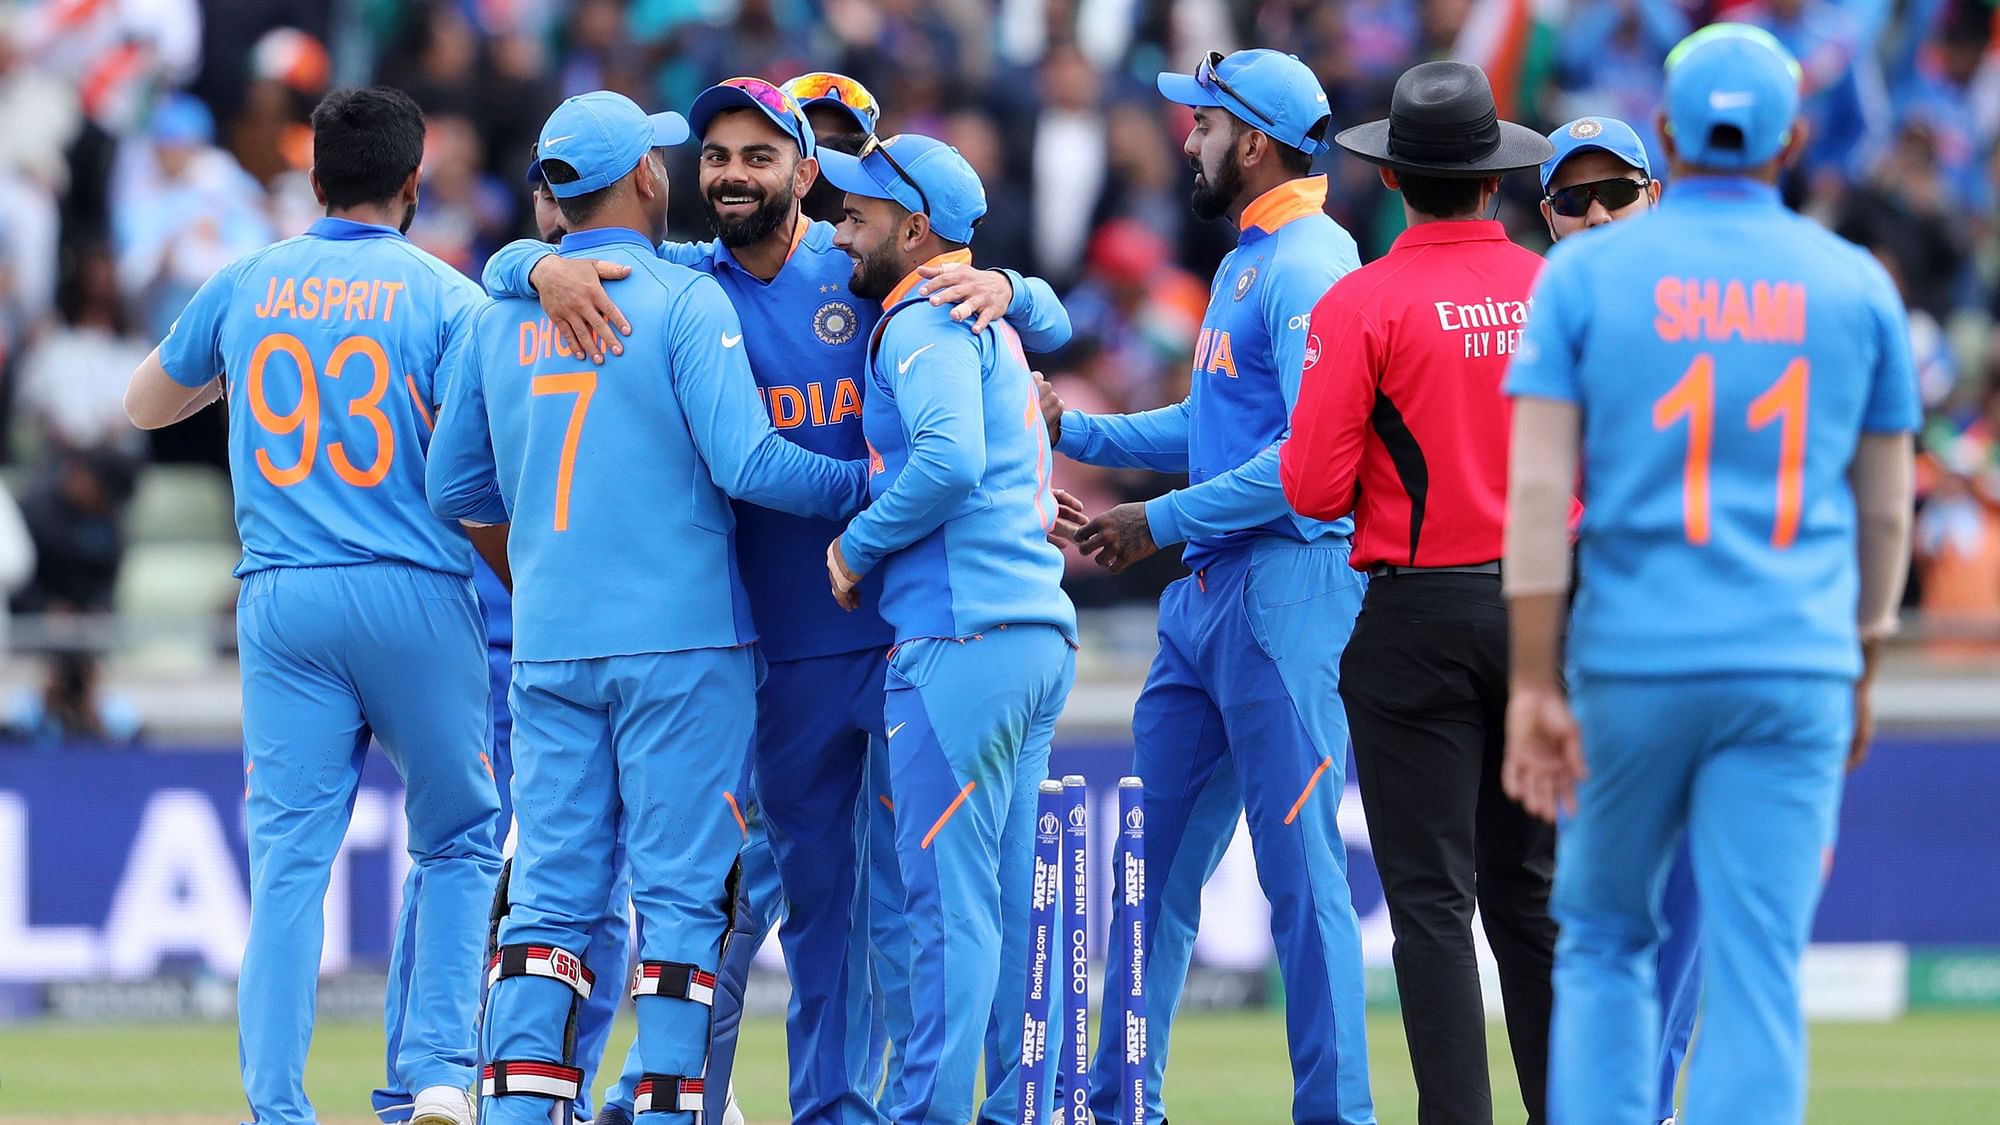 India have 13 points, one behind leader Australia, and play Sri Lanka in its final game at Headingley on Saturday.